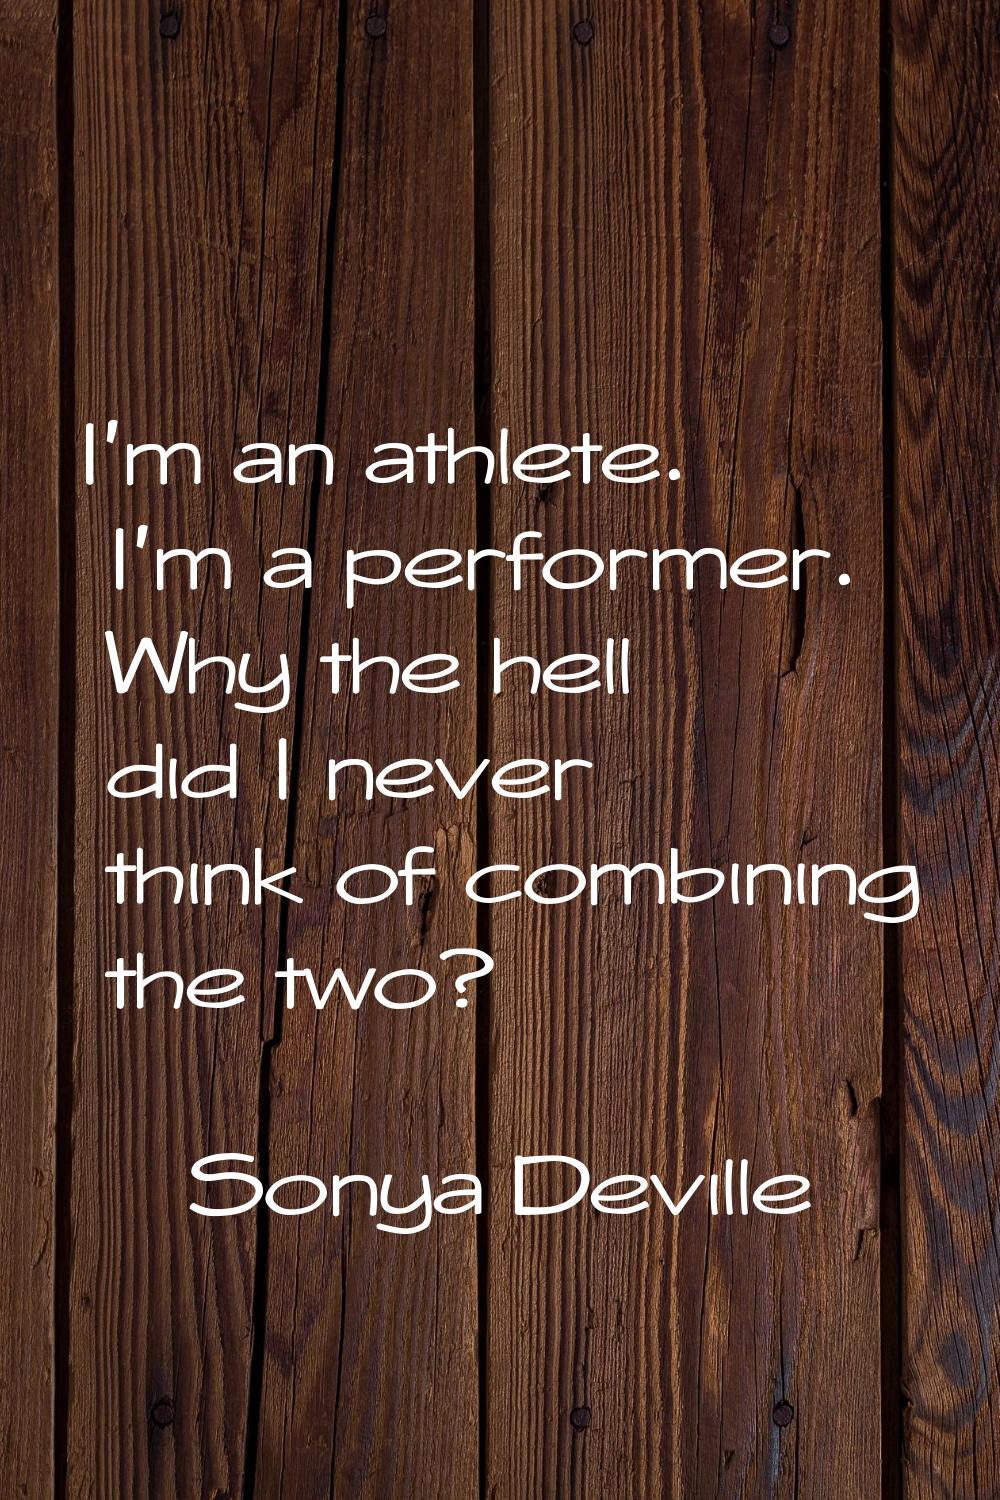 I'm an athlete. I'm a performer. Why the hell did I never think of combining the two?